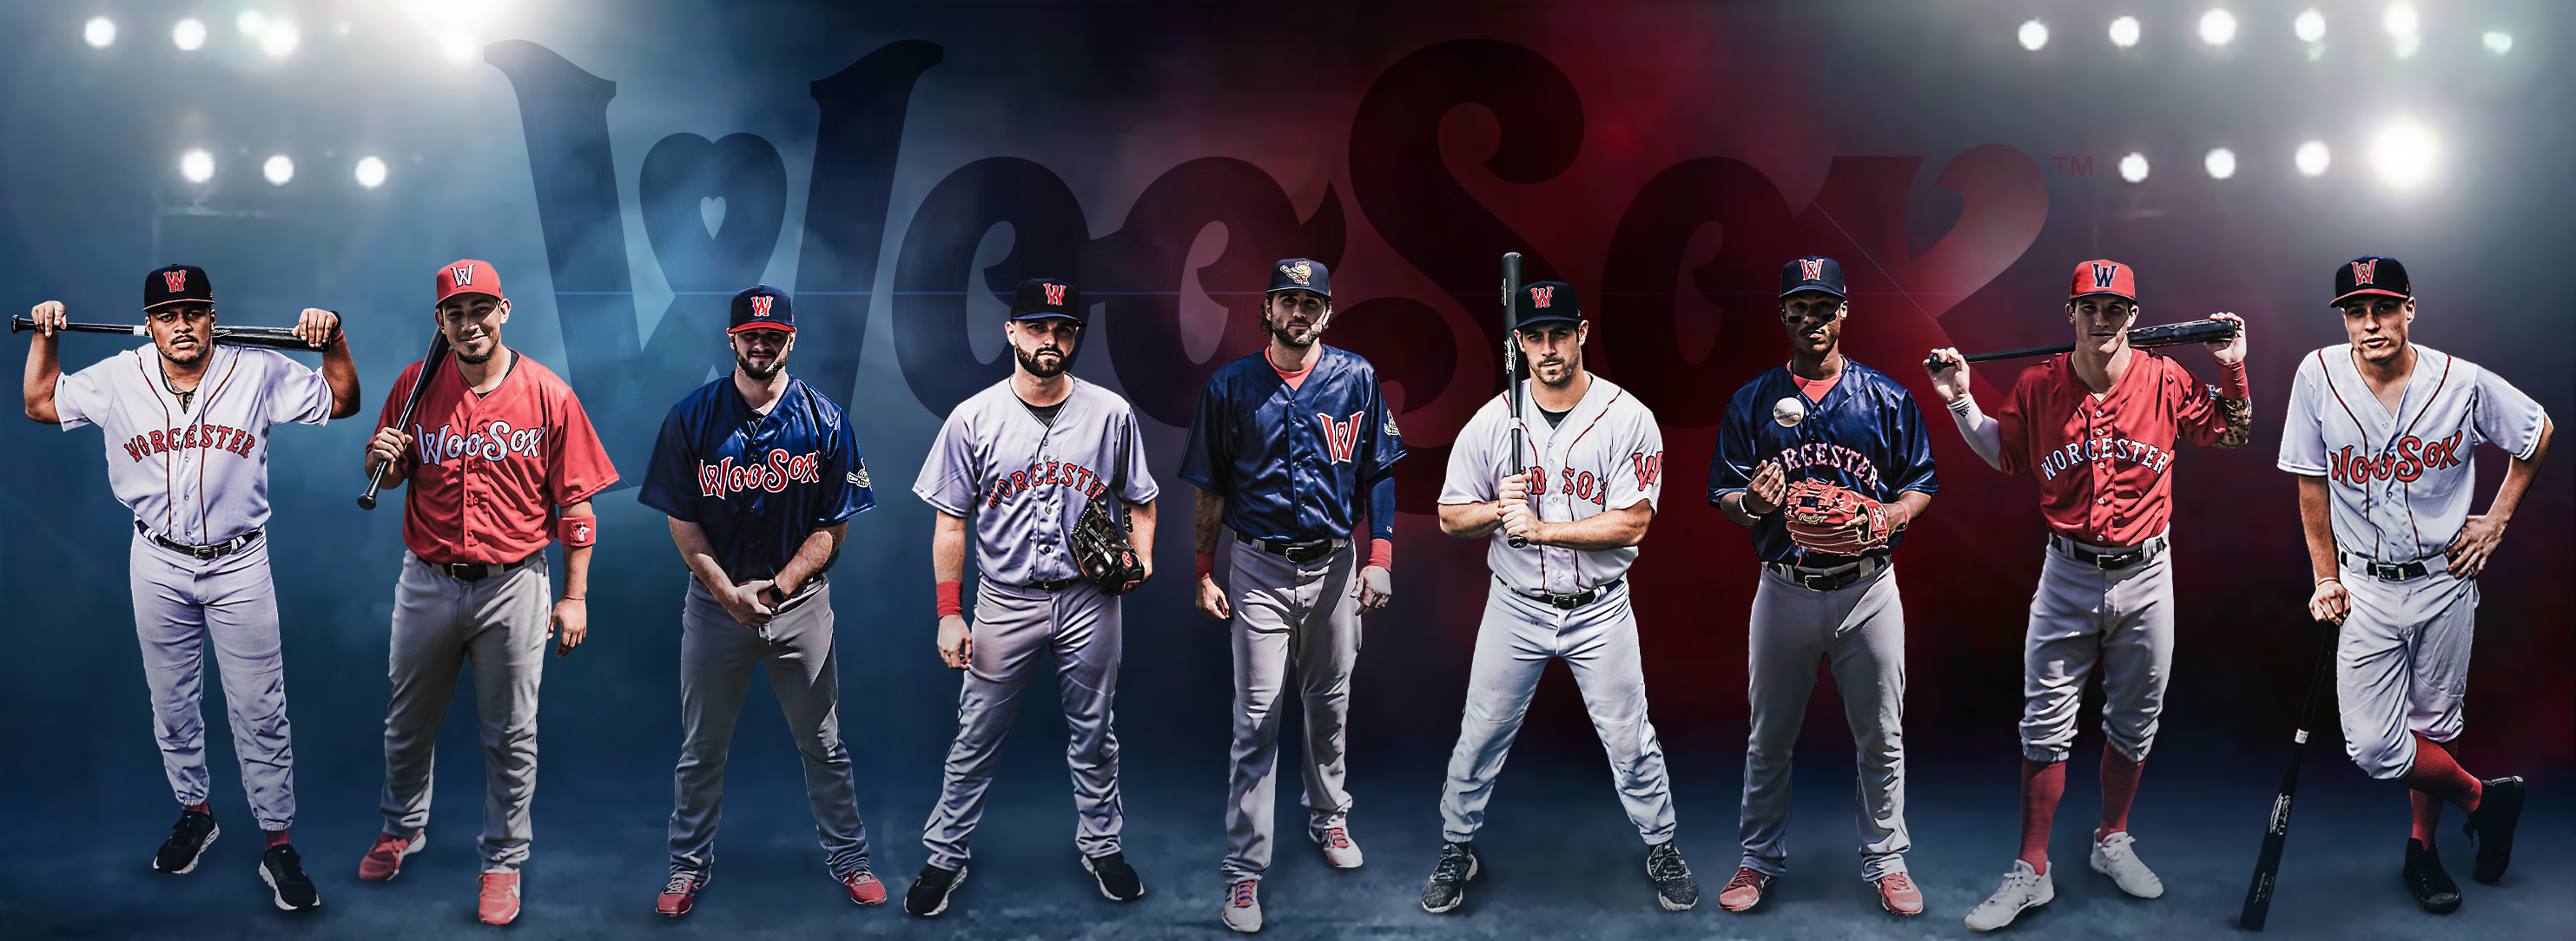 Worcester Red Sox unveil nine jerseys for 2021 season - The Boston Globe